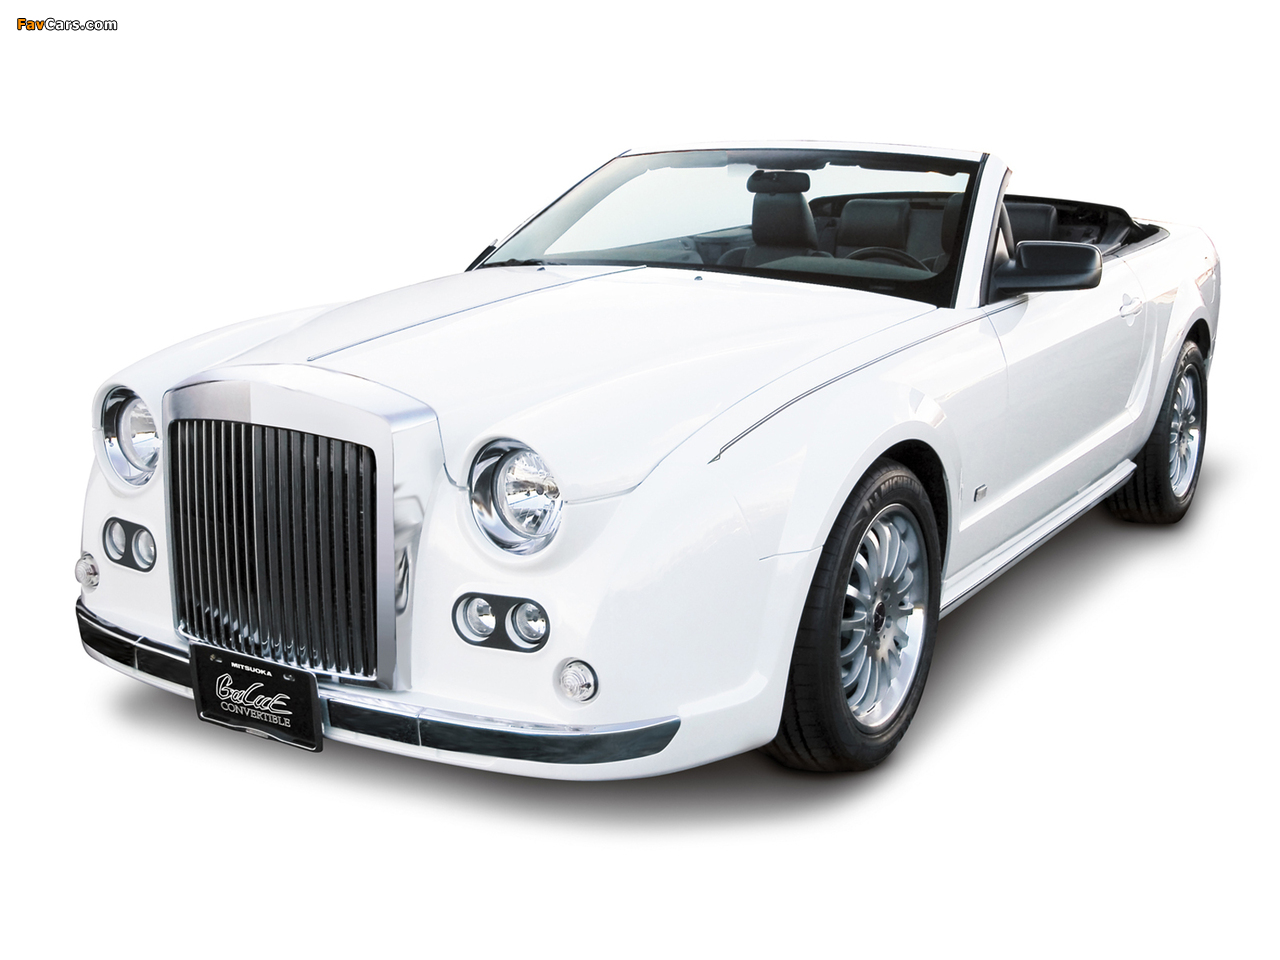 Images of Mitsuoka Galue Convertible 2007 (1280 x 960)